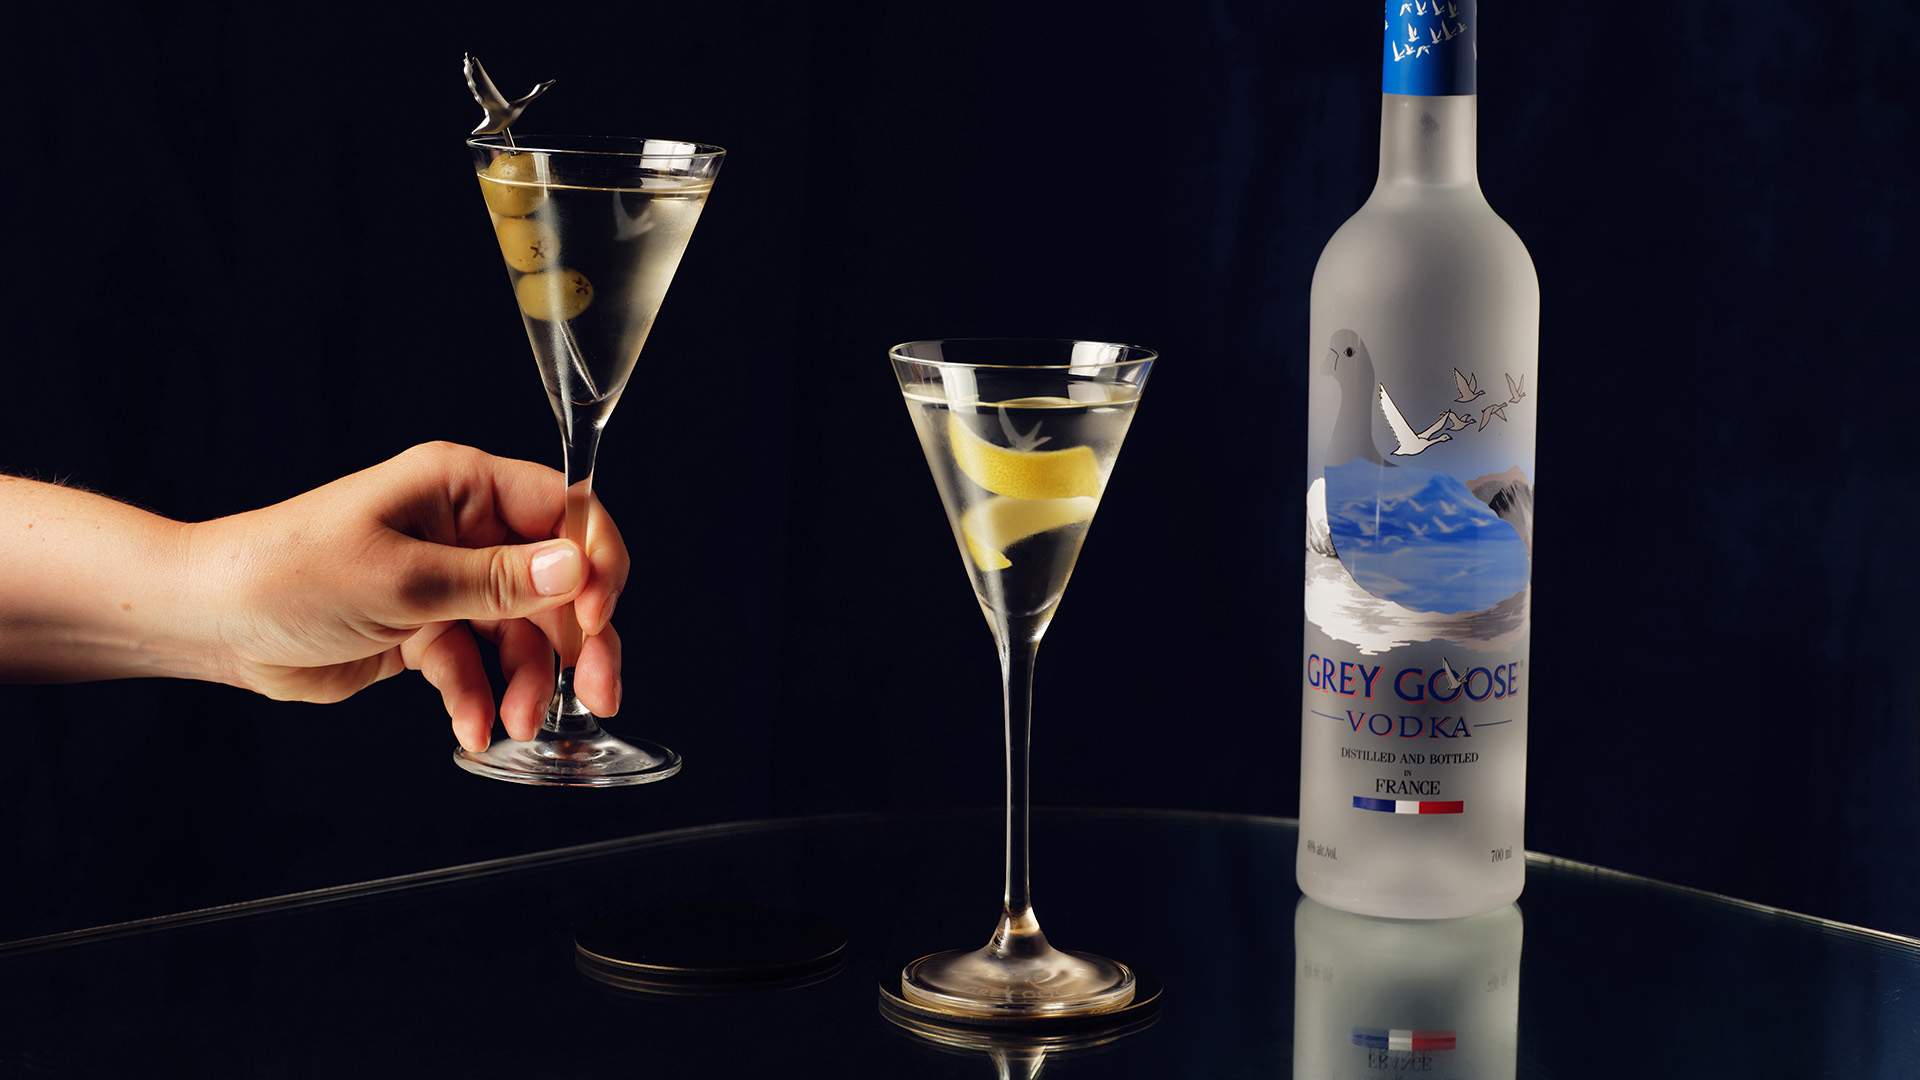 Coming Soon: Melbourne Is About to Become Home to the World's First-Ever Grey Goose Martini Bar